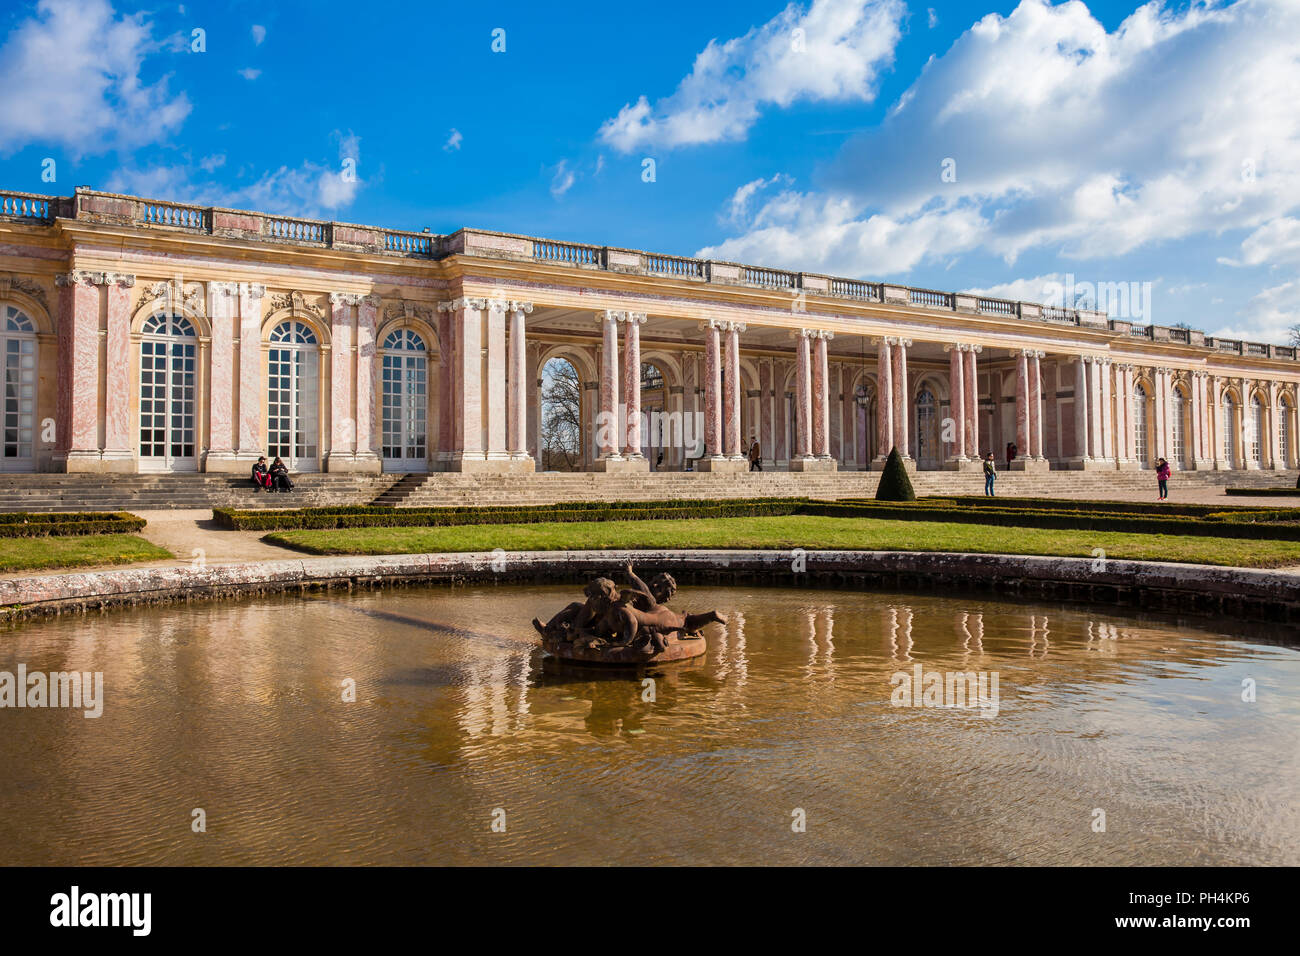 The  Grand Trianon at the Versailles Palace in a freezing winter day just before spring Stock Photo